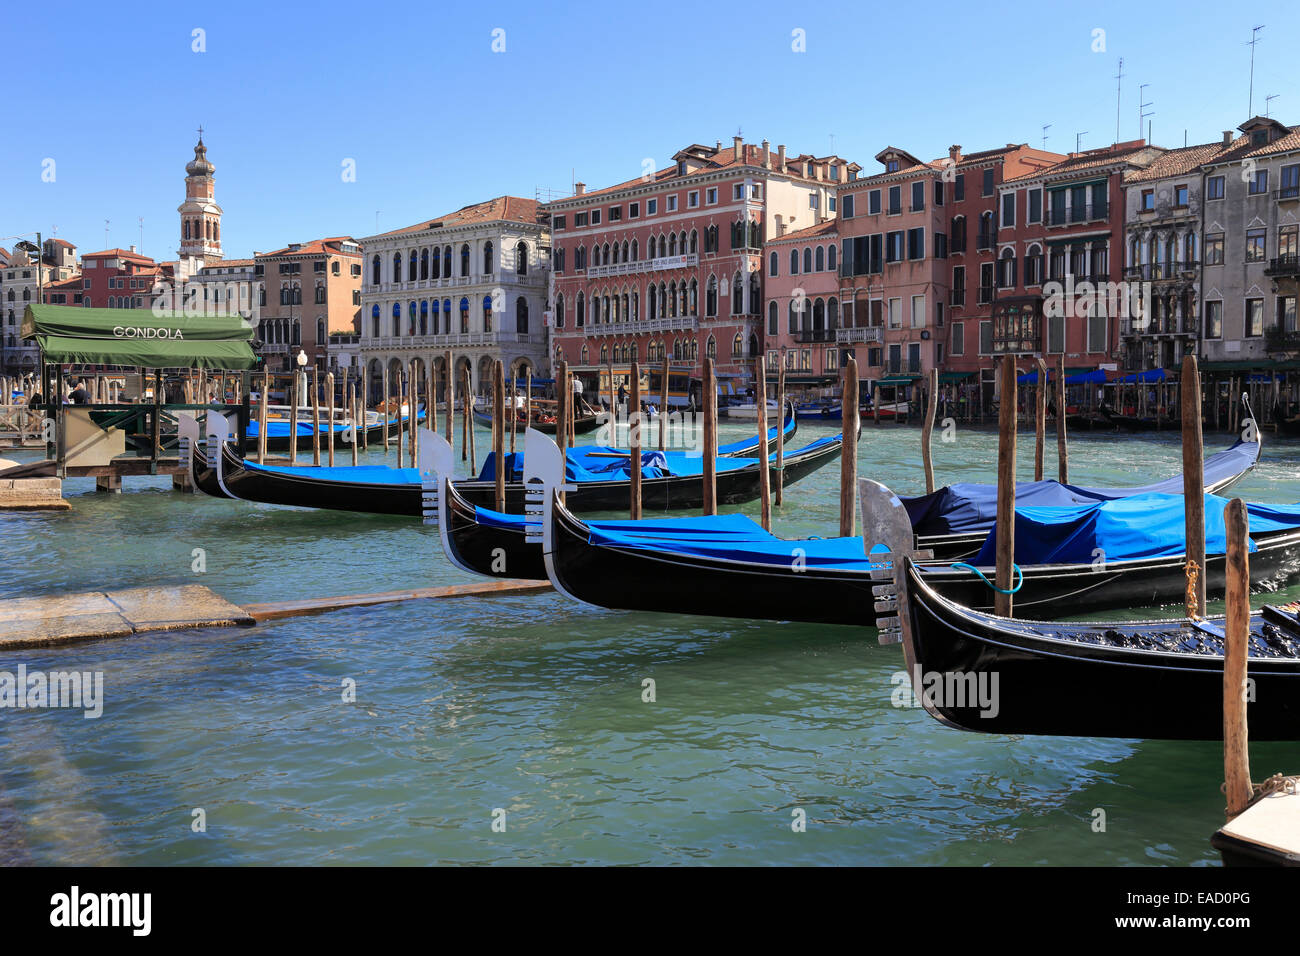 Gondolas berthed on the Grand Canal in Venice, Italy. Stock Photo